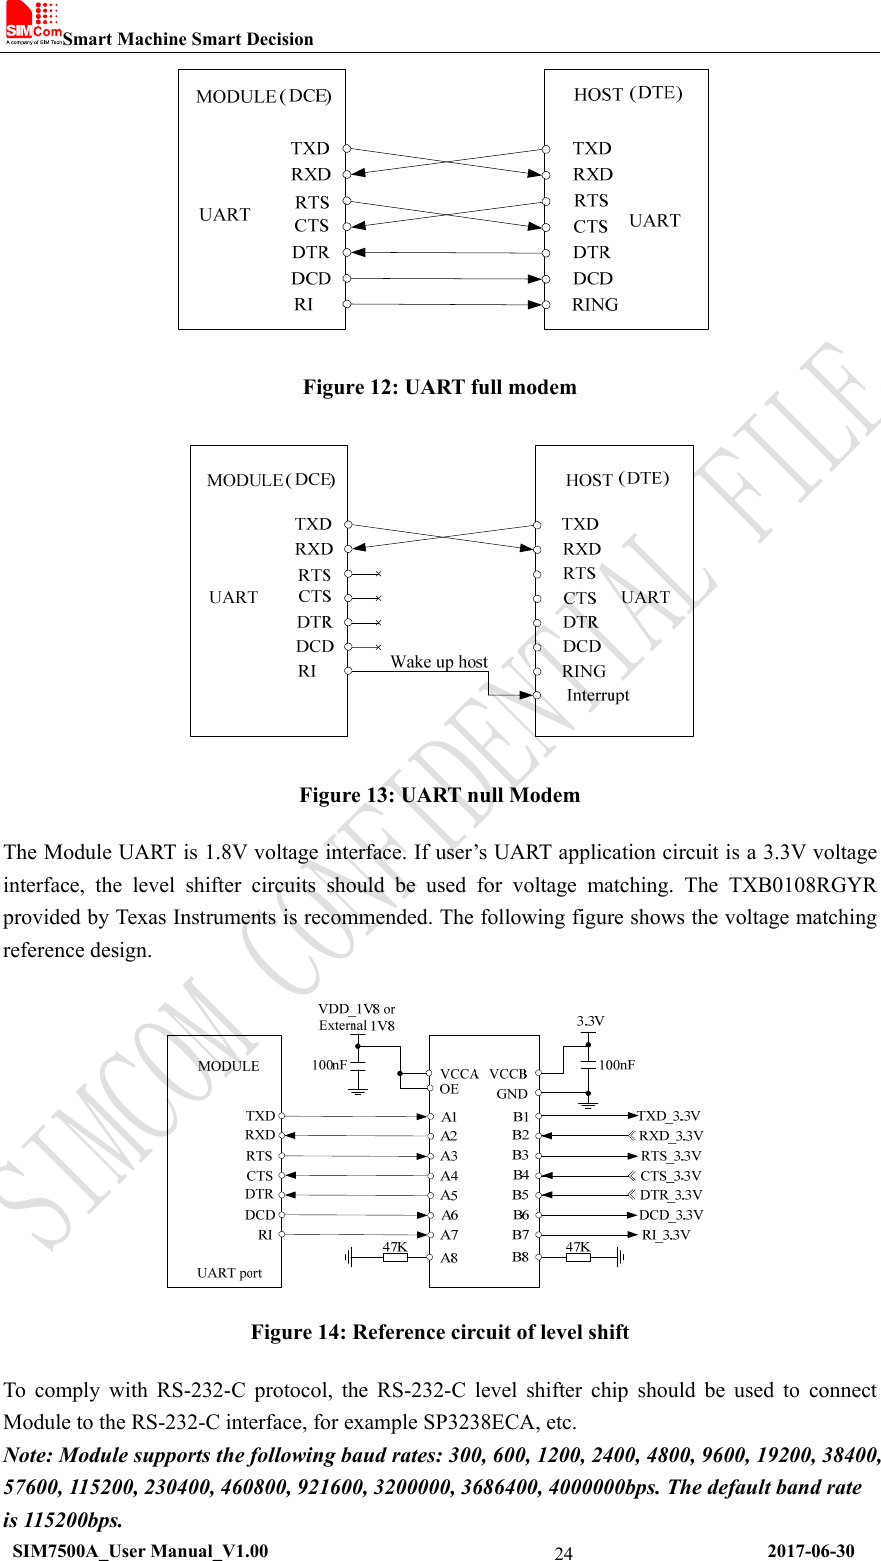 Smart Machine Smart Decision   SIM7500A_User Manual_V1.00                                                      2017-06-30 24 Figure 12: UART full modem  Figure 13: UART null Modem The Module UART is 1.8V voltage interface. If user’s UART application circuit is a 3.3V voltage interface,  the  level  shifter  circuits  should  be  used  for  voltage  matching.  The  TXB0108RGYR provided by Texas Instruments is recommended. The following figure shows the voltage matching reference design.   Figure 14: Reference circuit of level shift To  comply  with  RS-232-C  protocol,  the  RS-232-C  level  shifter  chip  should  be  used  to  connect Module to the RS-232-C interface, for example SP3238ECA, etc. Note: Module supports the following baud rates: 300, 600, 1200, 2400, 4800, 9600, 19200, 38400, 57600, 115200, 230400, 460800, 921600, 3200000, 3686400, 4000000bps. The default band rate is 115200bps. 